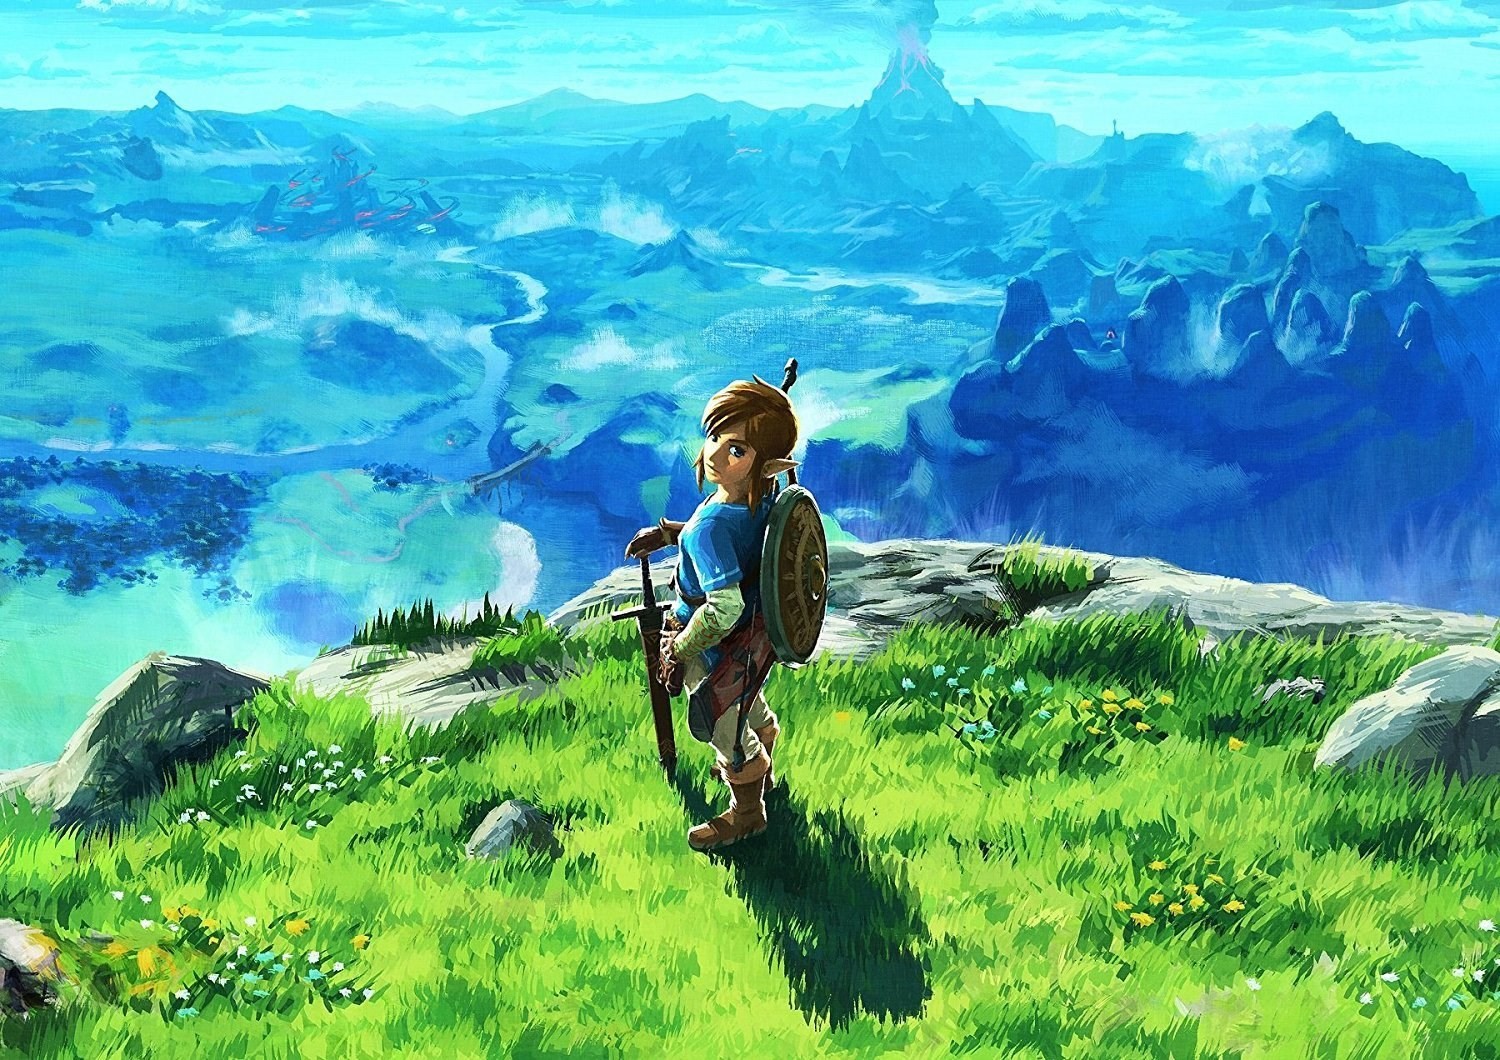 A live-action Legend of Zelda movie is in development - The Japan Times